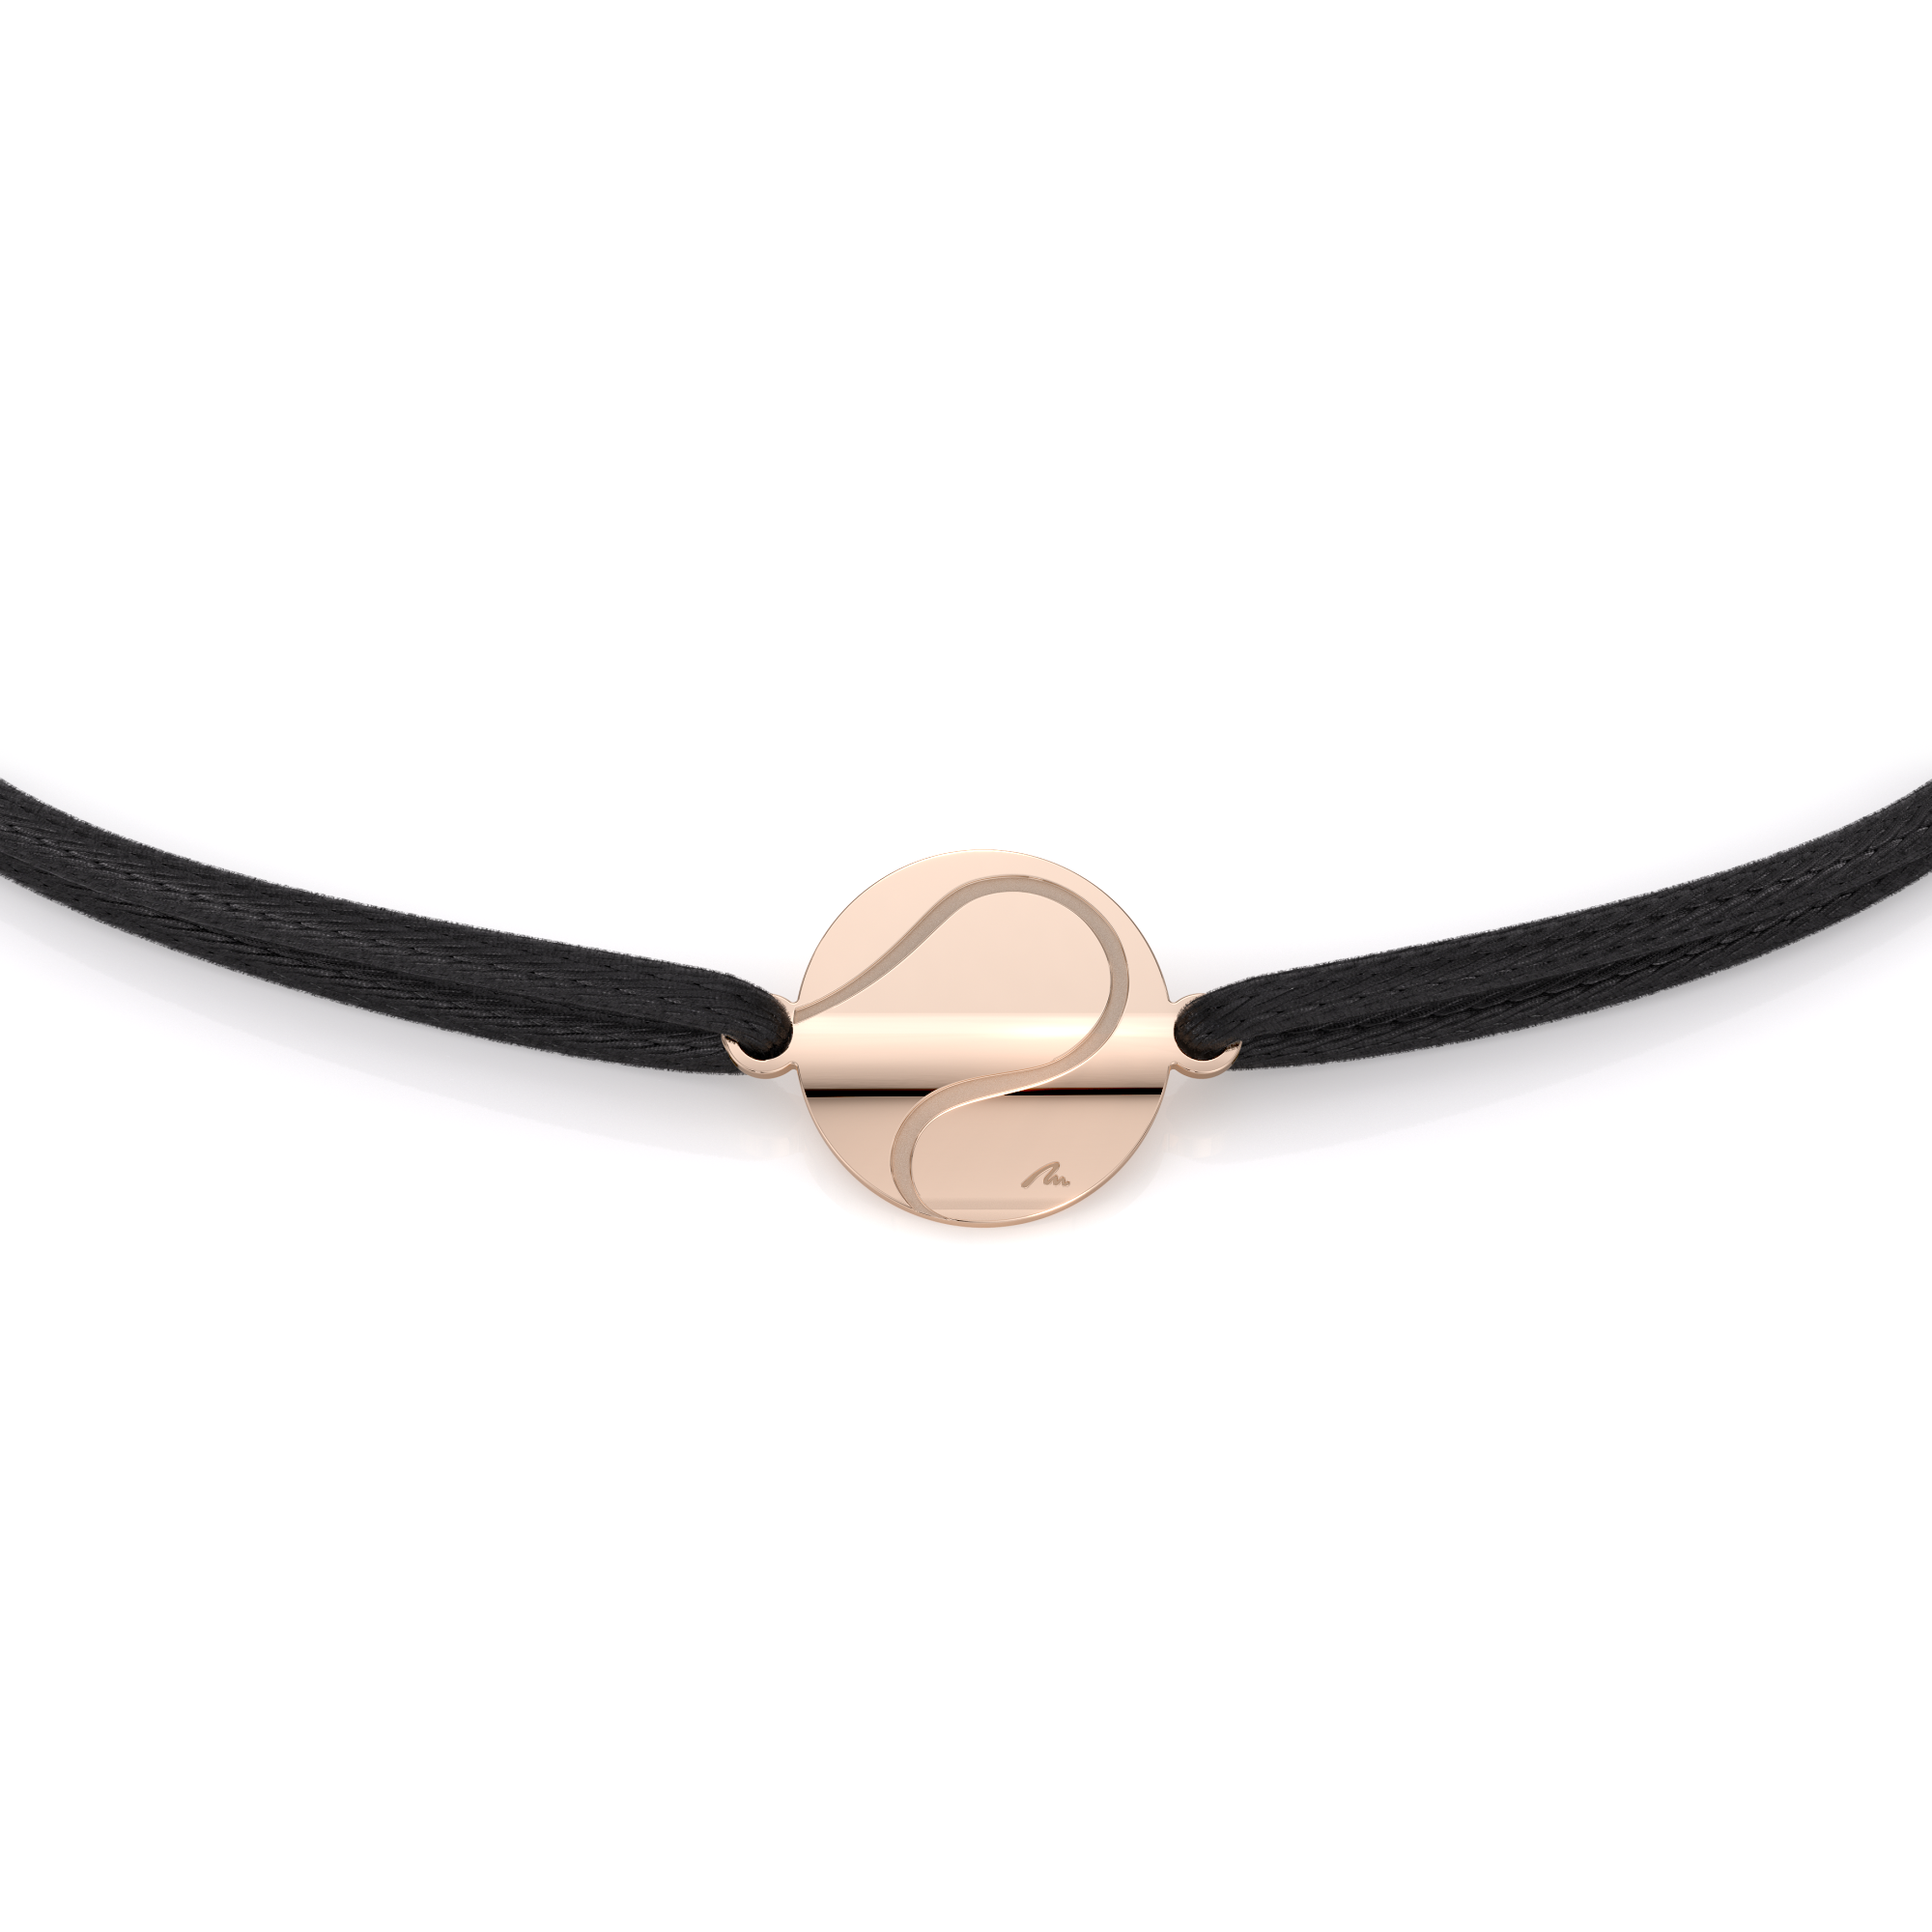 String bracelet with Tennis Ball pendant in brass plated with rose gold